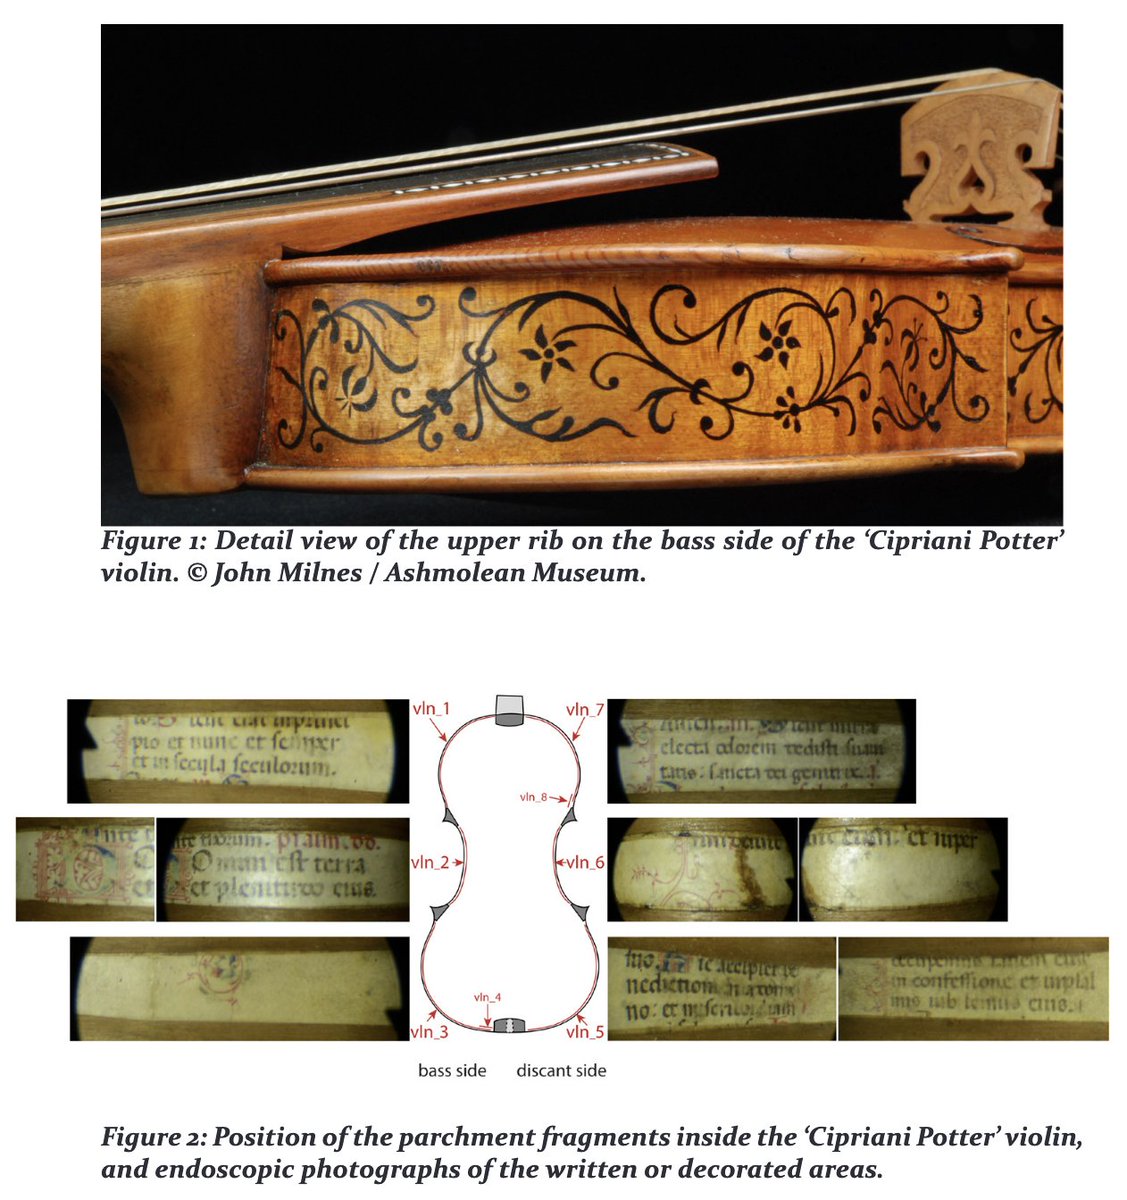 This is wild: reconstructing folios from recycled fragments of late medieval books of hours found inside Stradivarius violins, imaged via endoscopic camera. Only in fragmentology.ms 
fragmentology.ms/article/view/s…